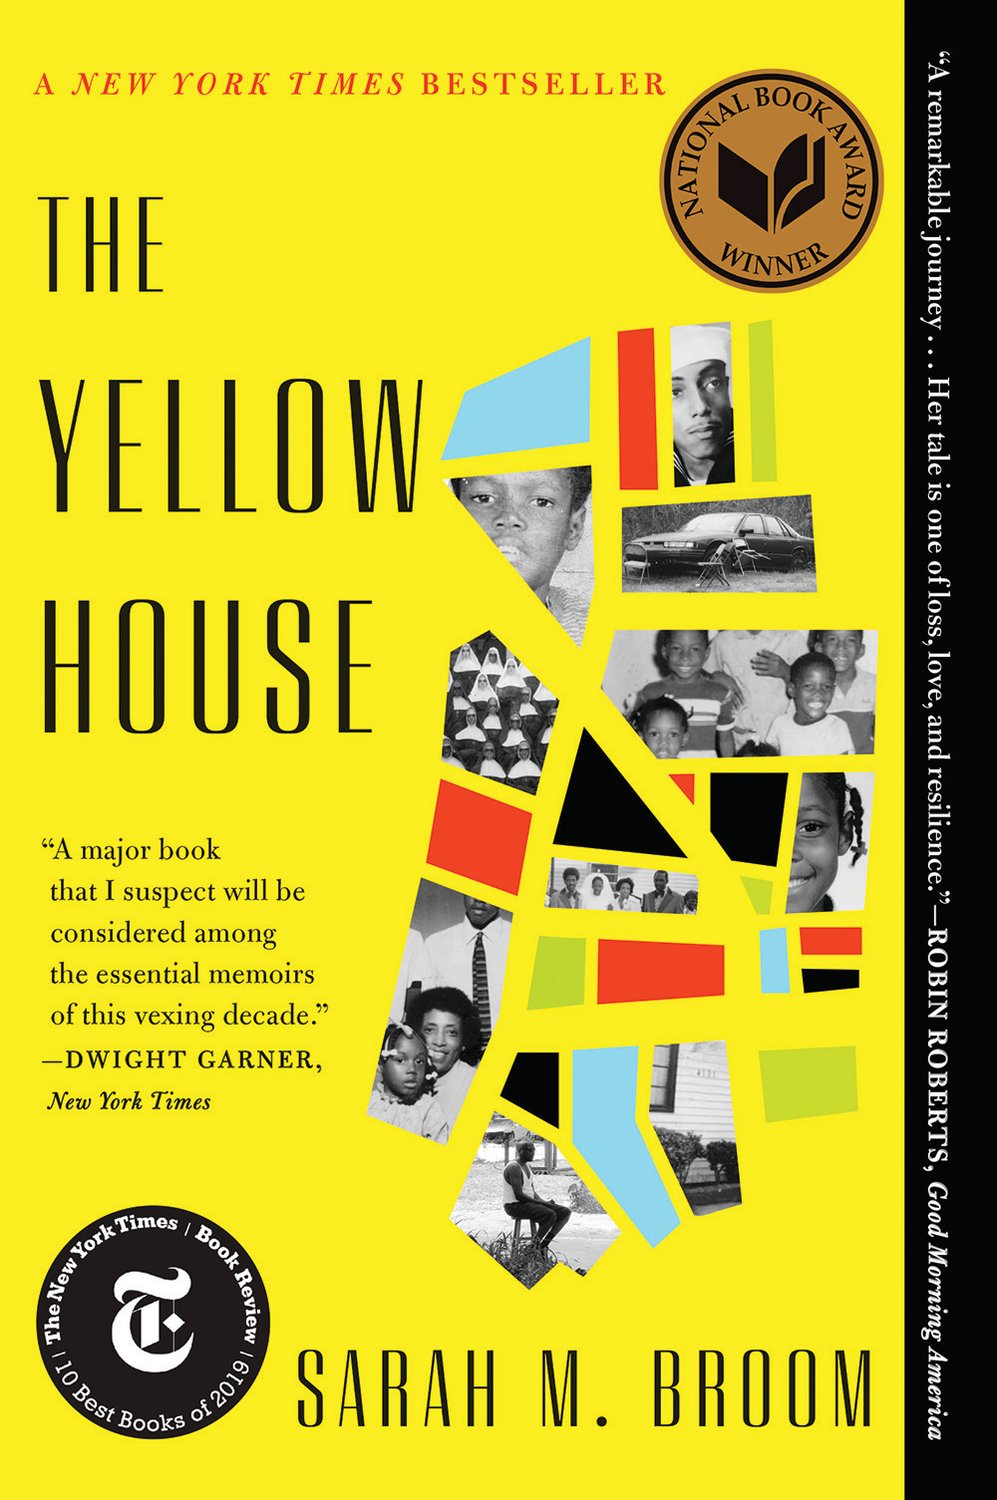 "The Yellow House"